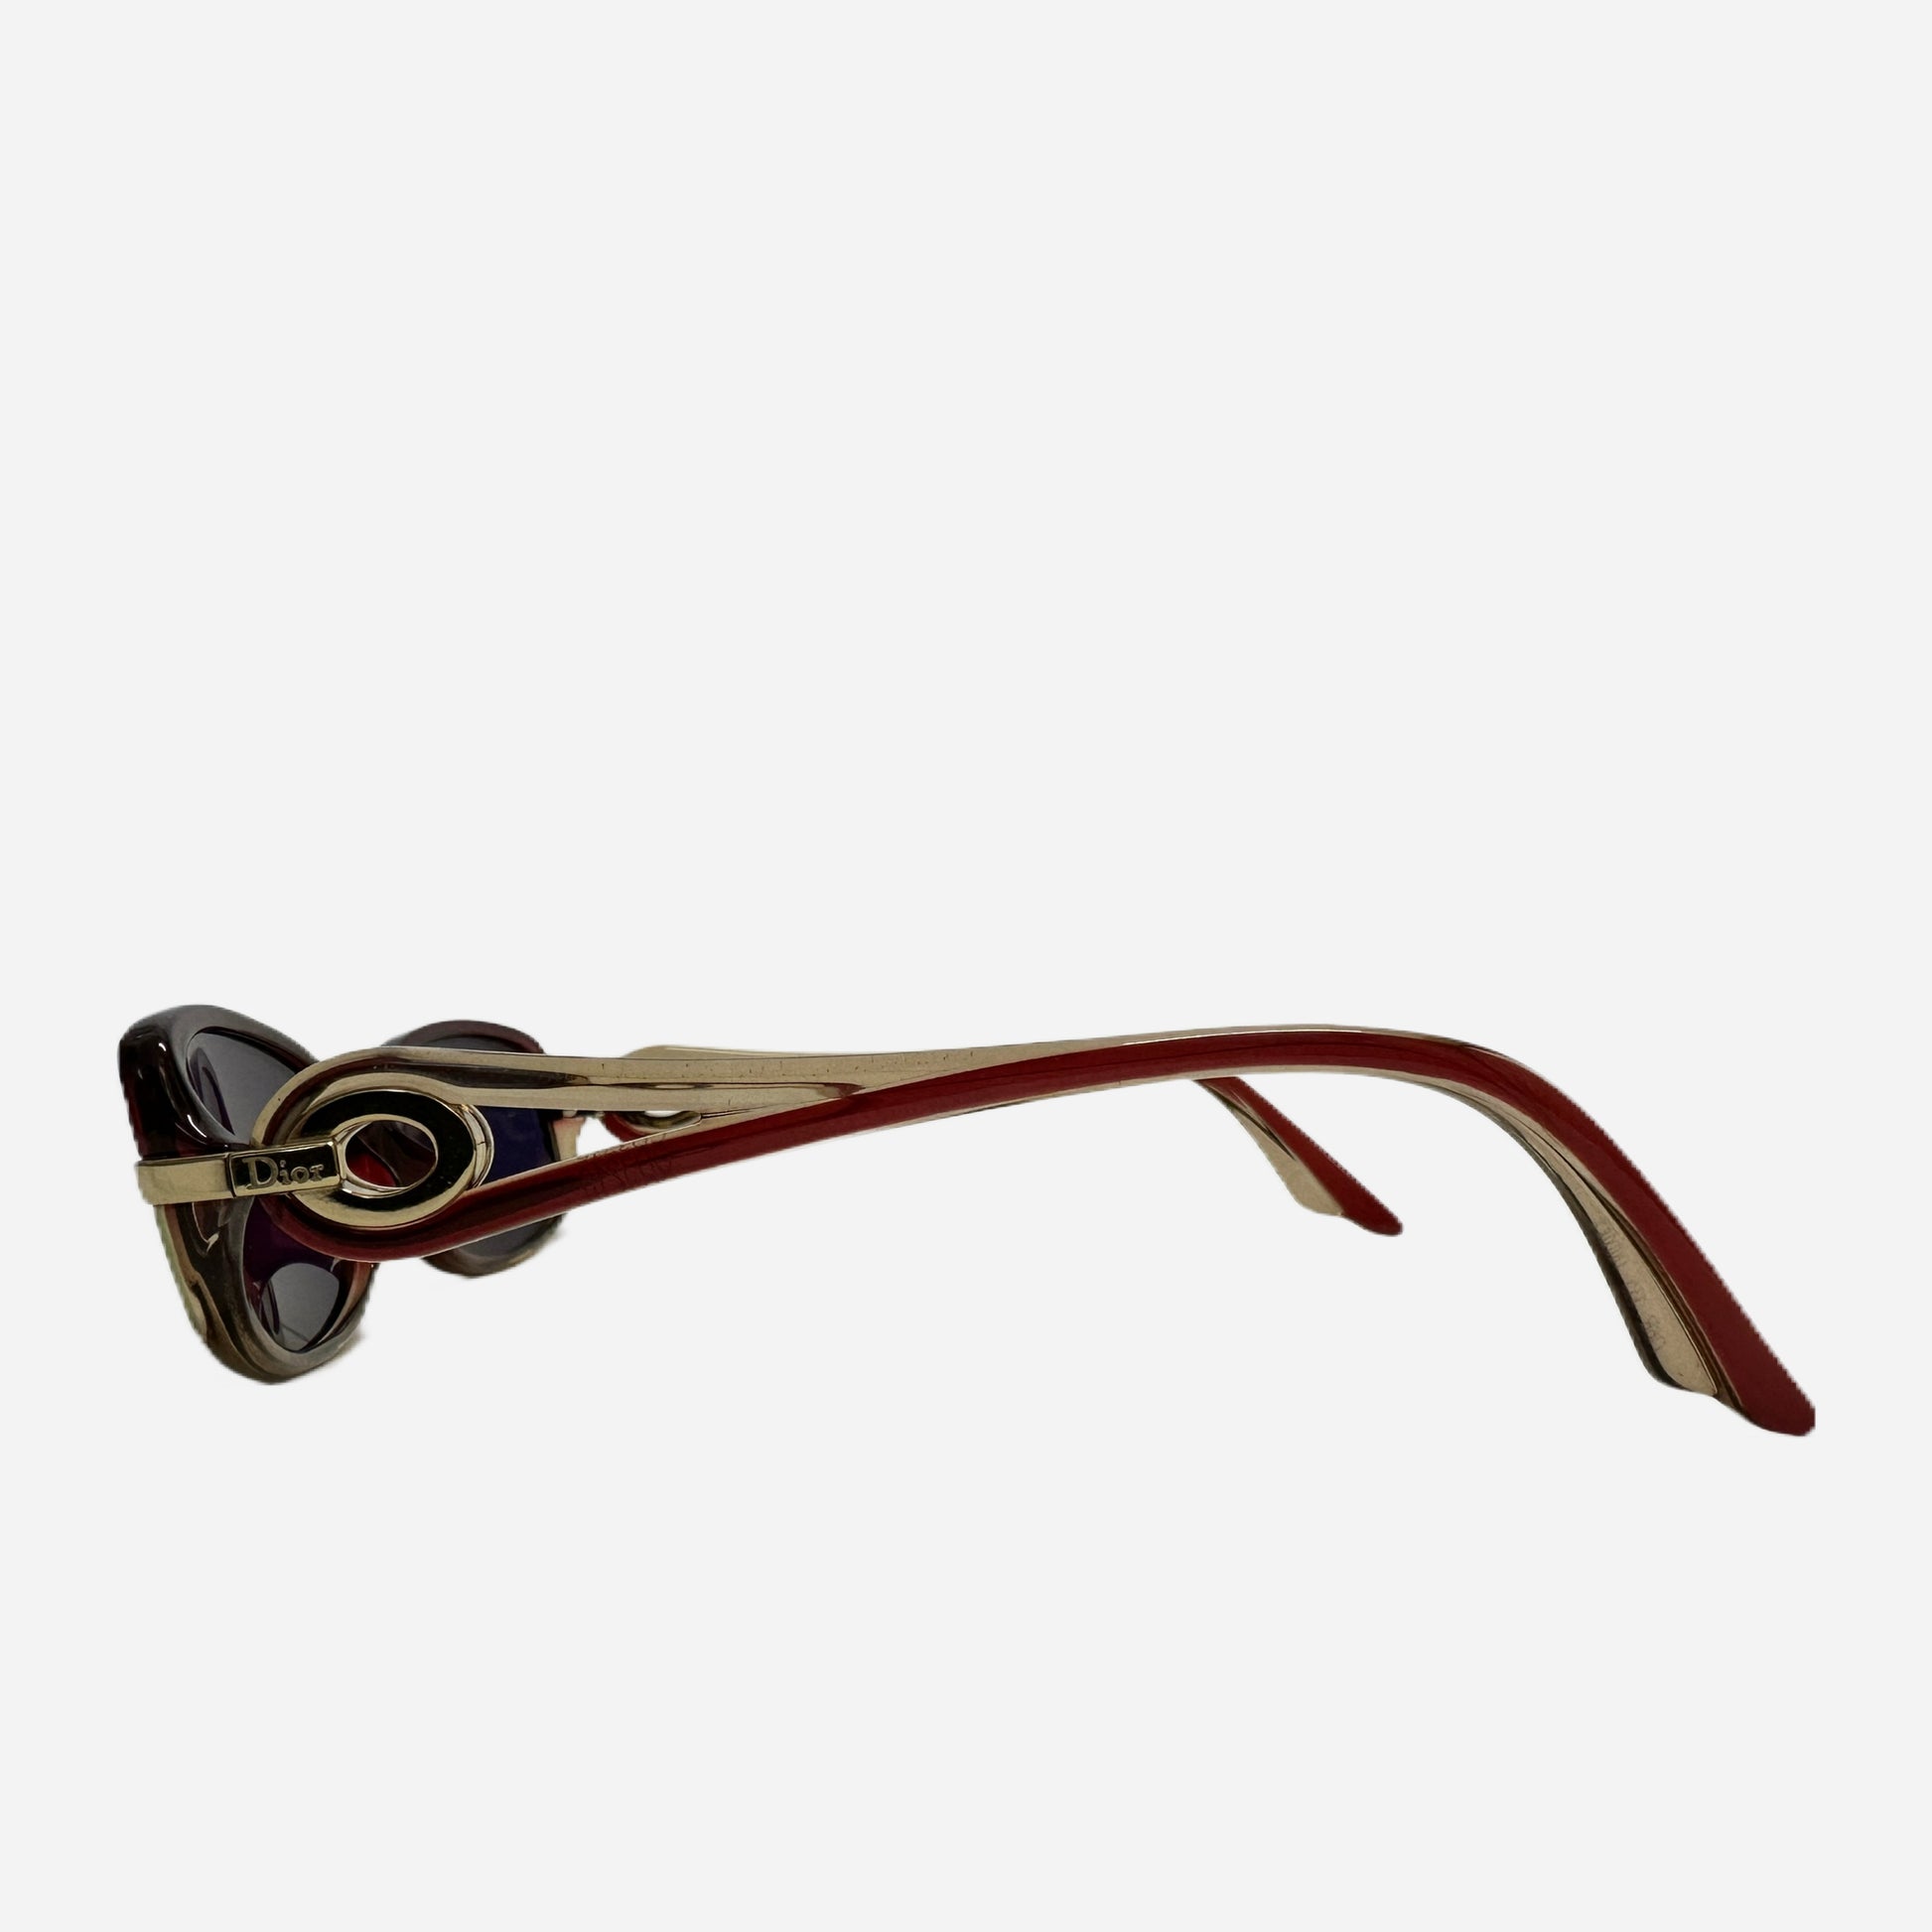 Vintage-Christian-Dior-Sonnenbrille-Sonnenbrille-3216-Optyl-The-Seekers-side-1